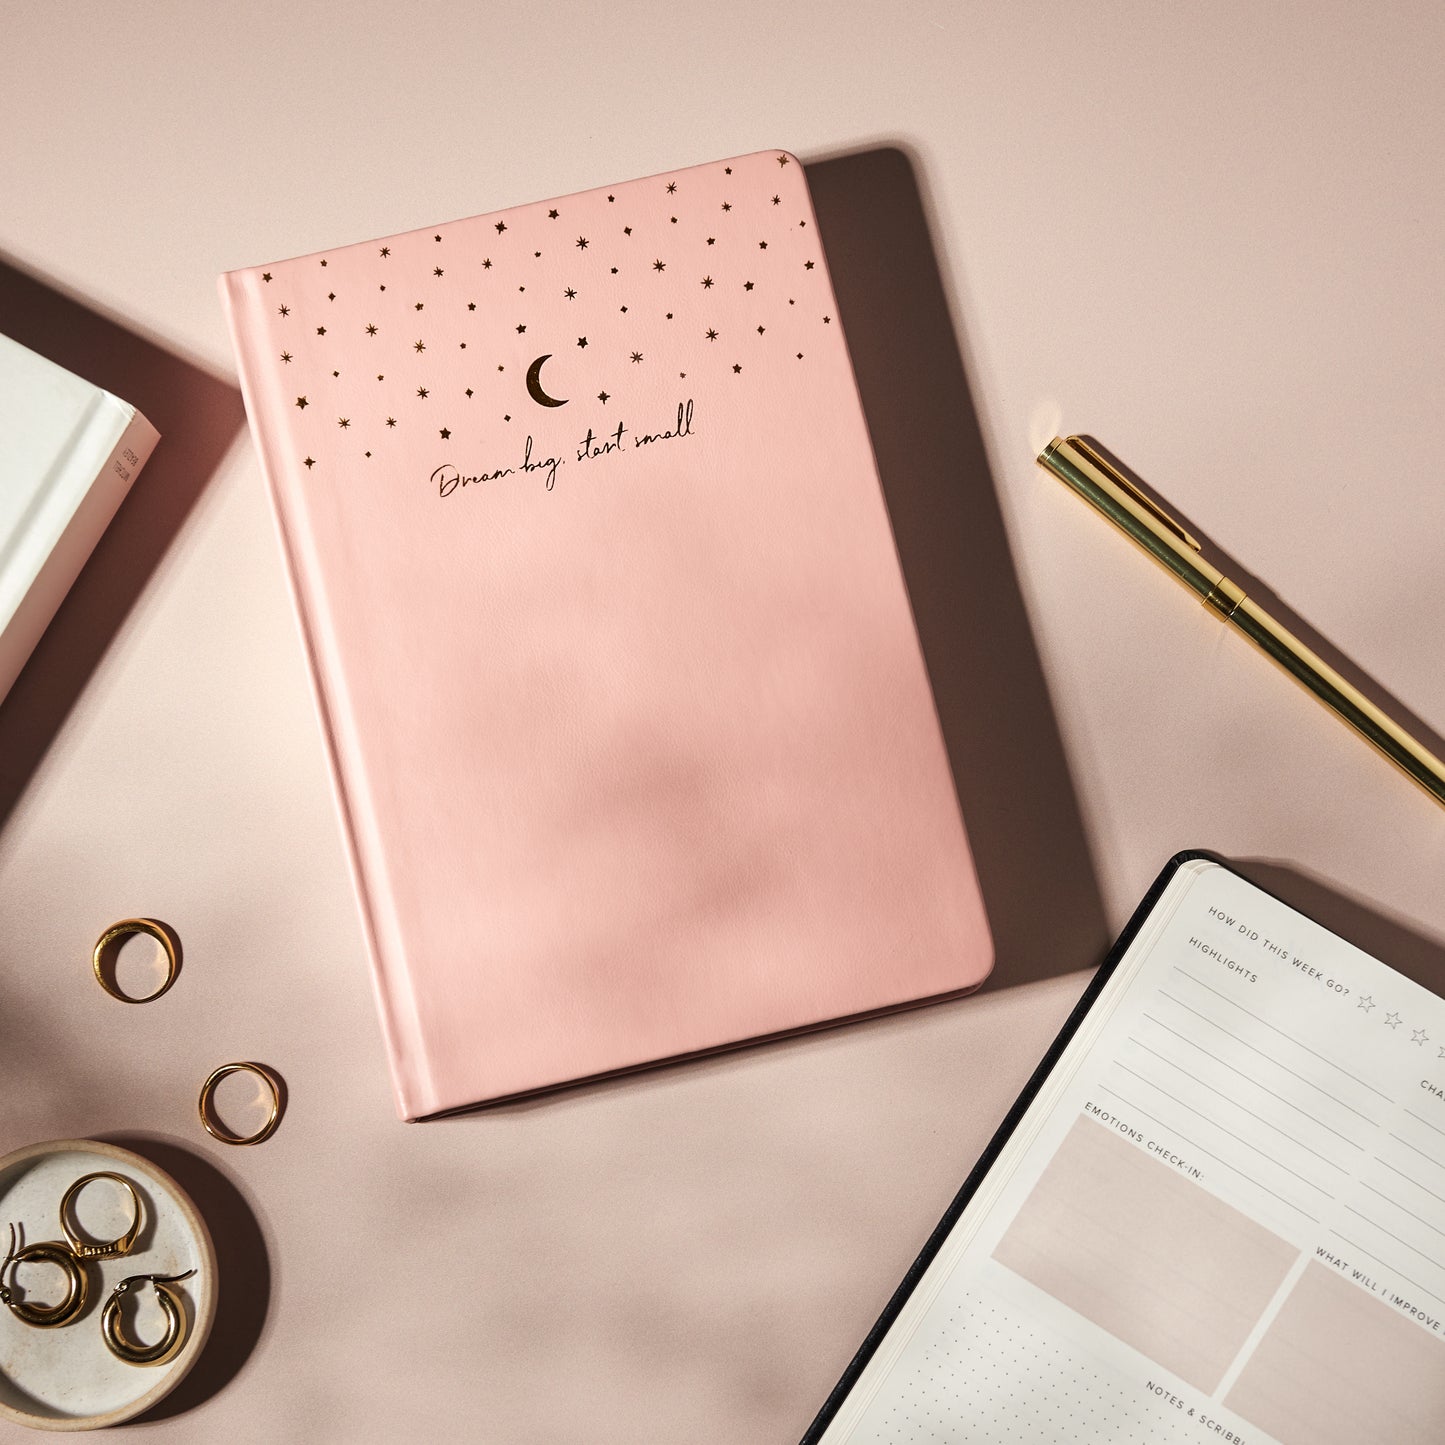 Undated Weekly Lifestyle Planner (OUTLET)